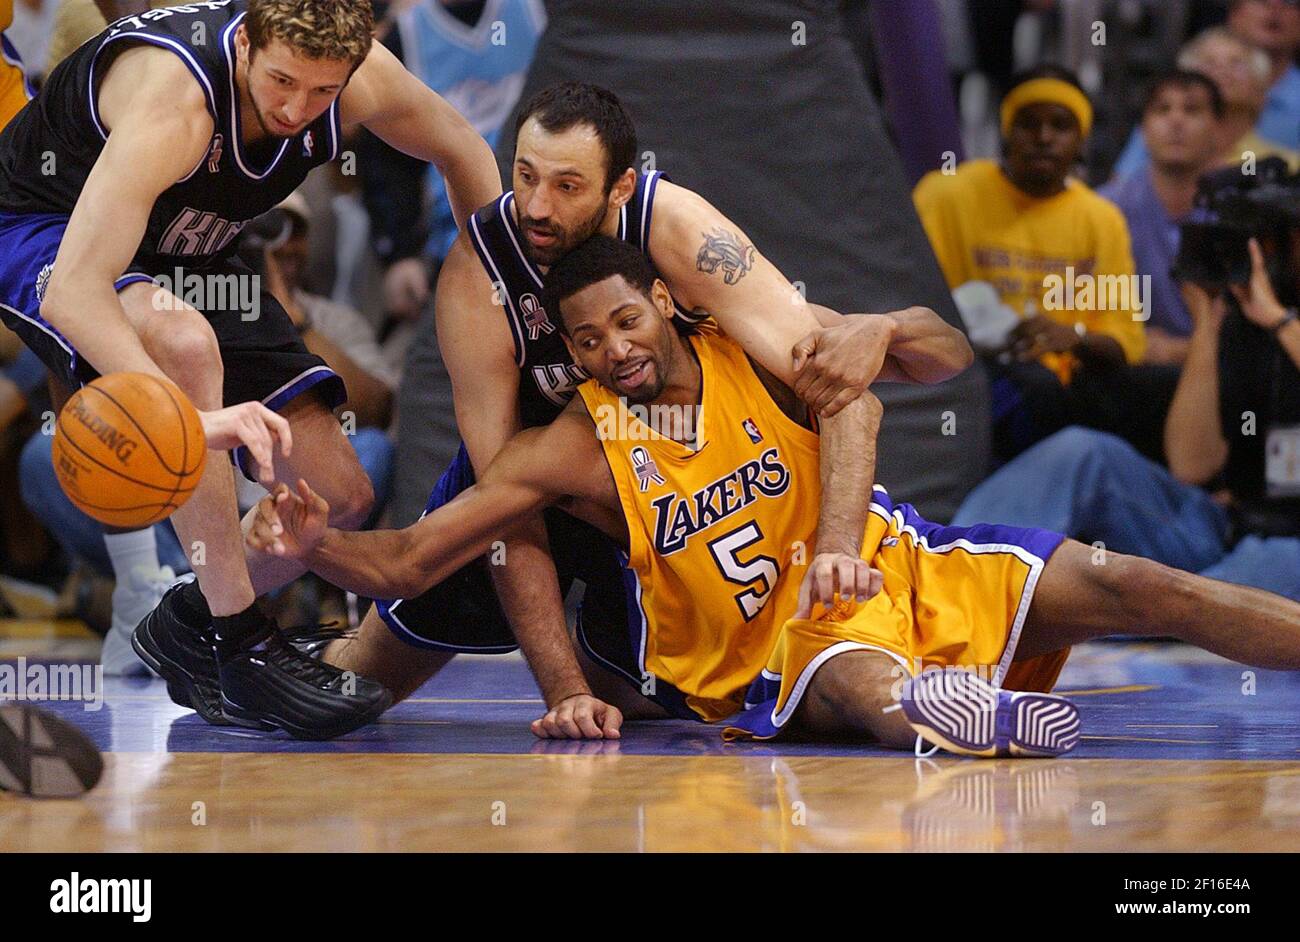 Sacramento Kings' Vlade Divac looks up as he loses the ball in the second  quarter against the Los Angeles Lakers in Game 6 of the Western Conference  finals in Los Angeles., Friday